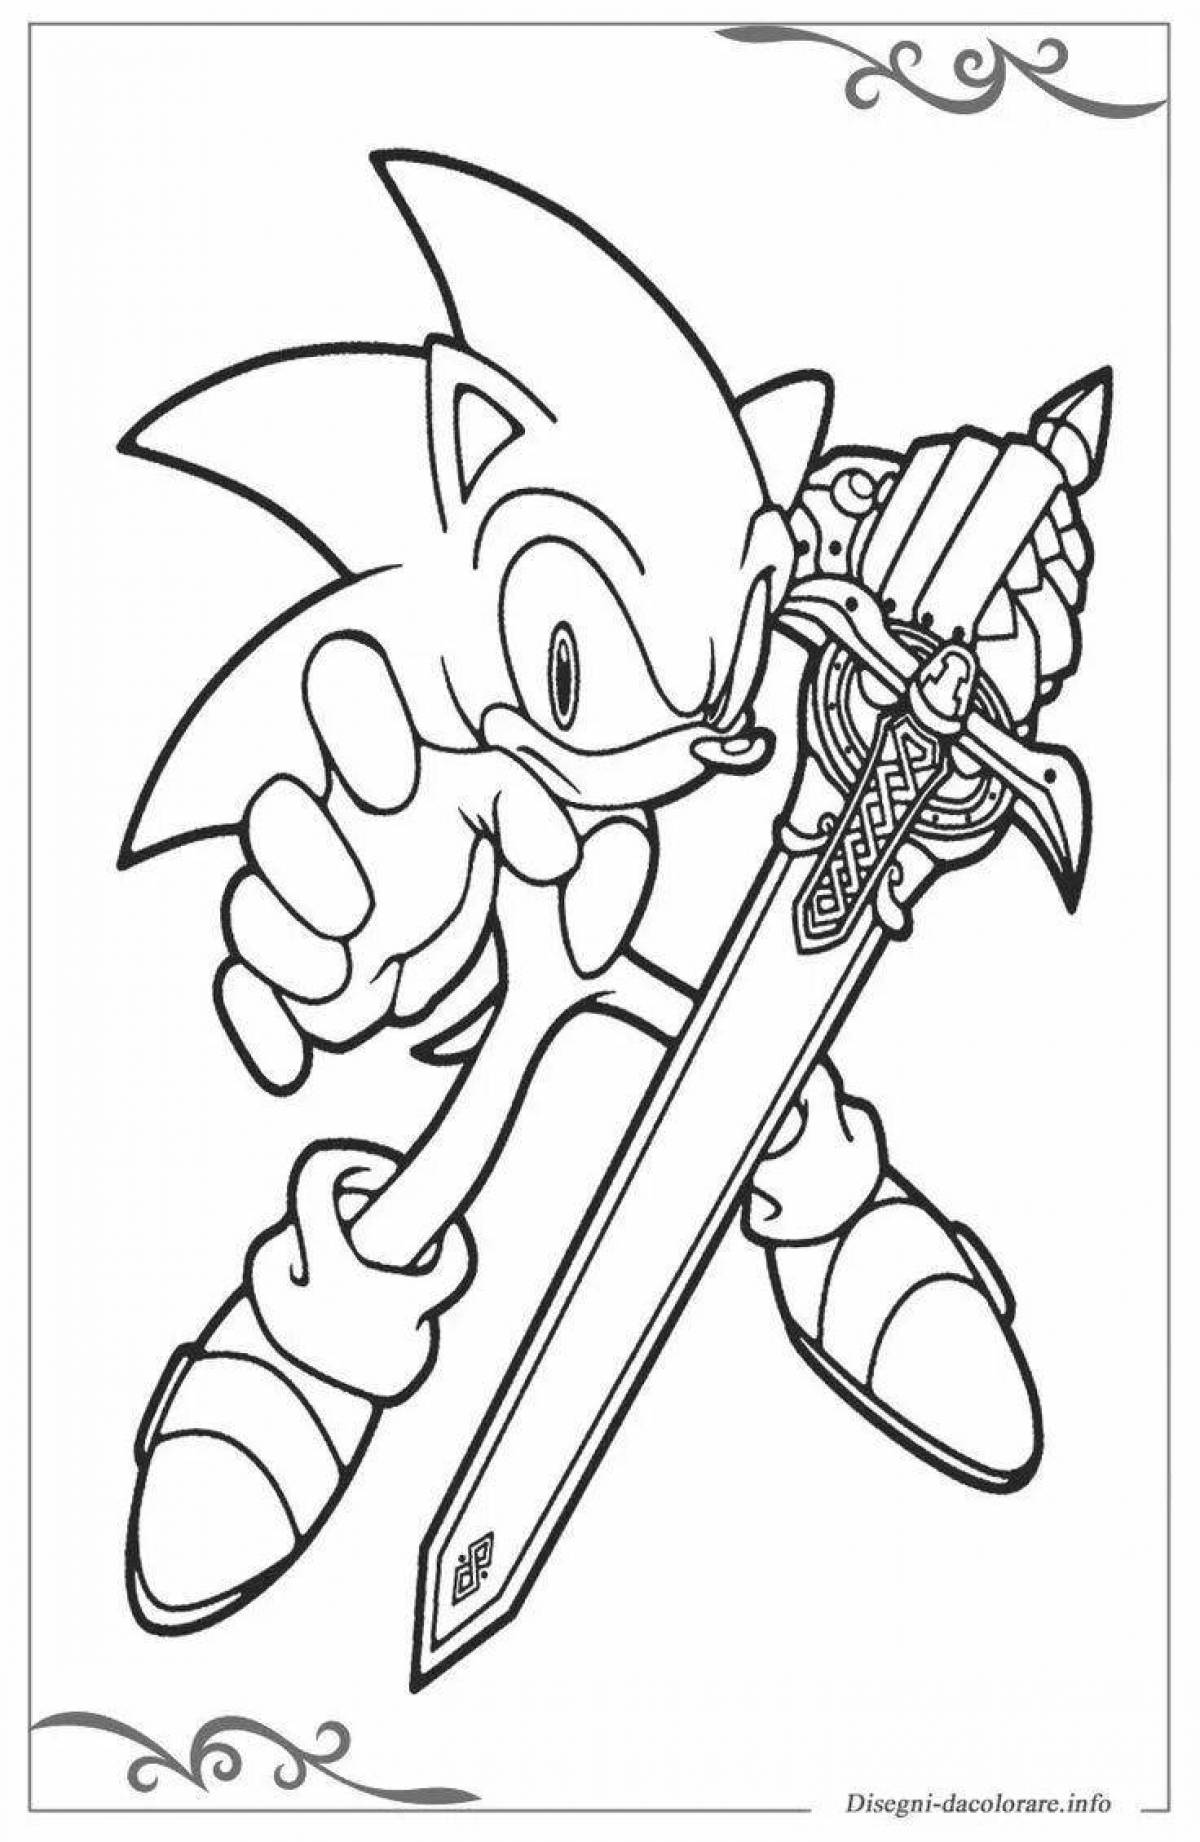 Great coloring sonic egzy